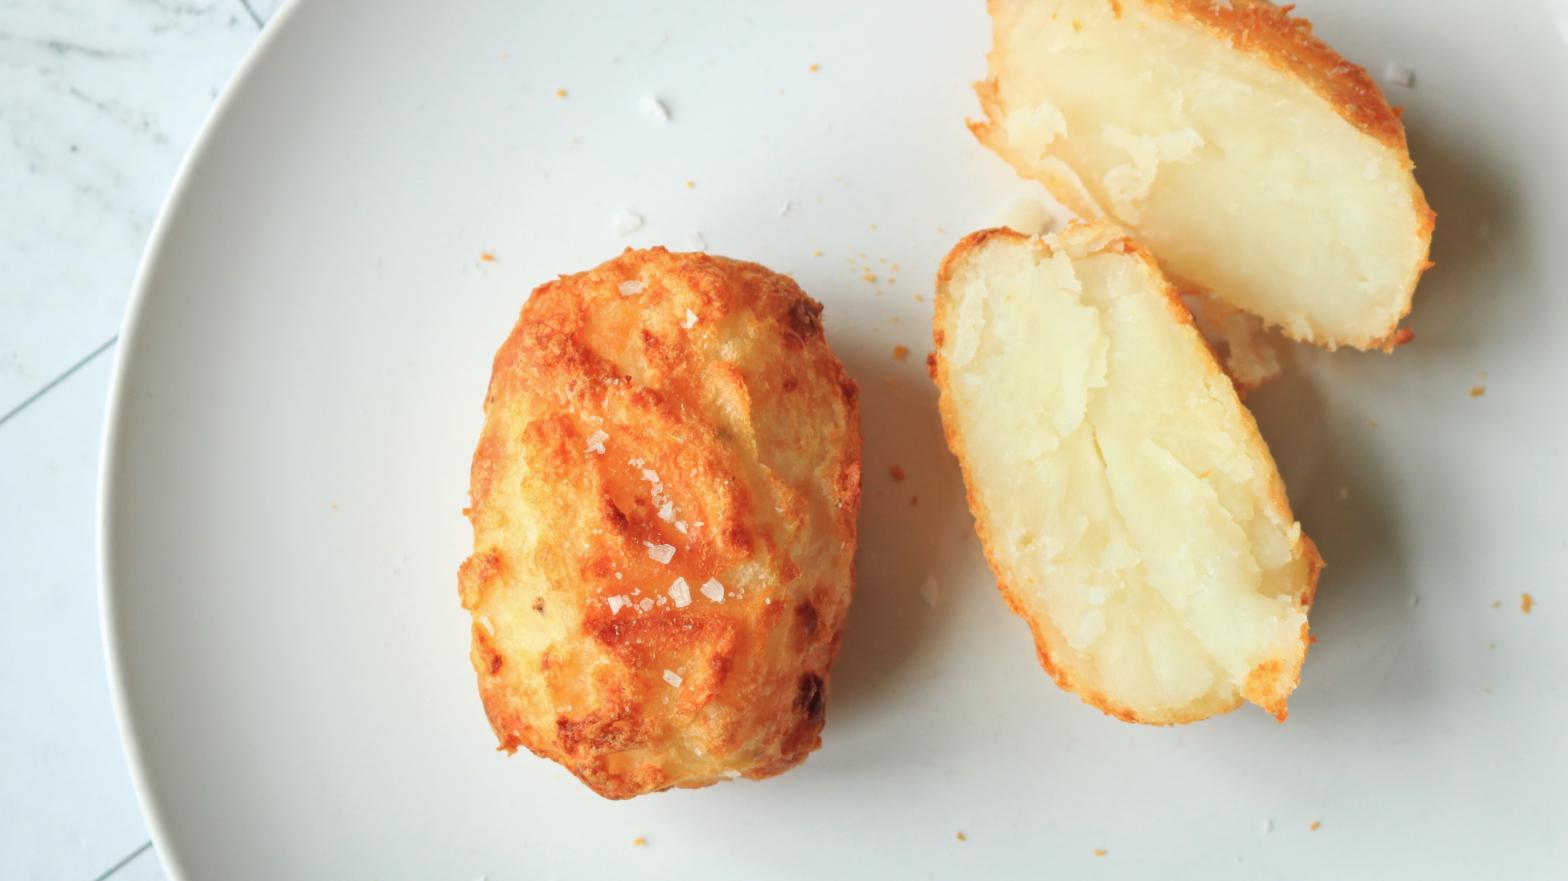 This Viral Roasted Potato Recipe Tastes Like a Giant French Fry